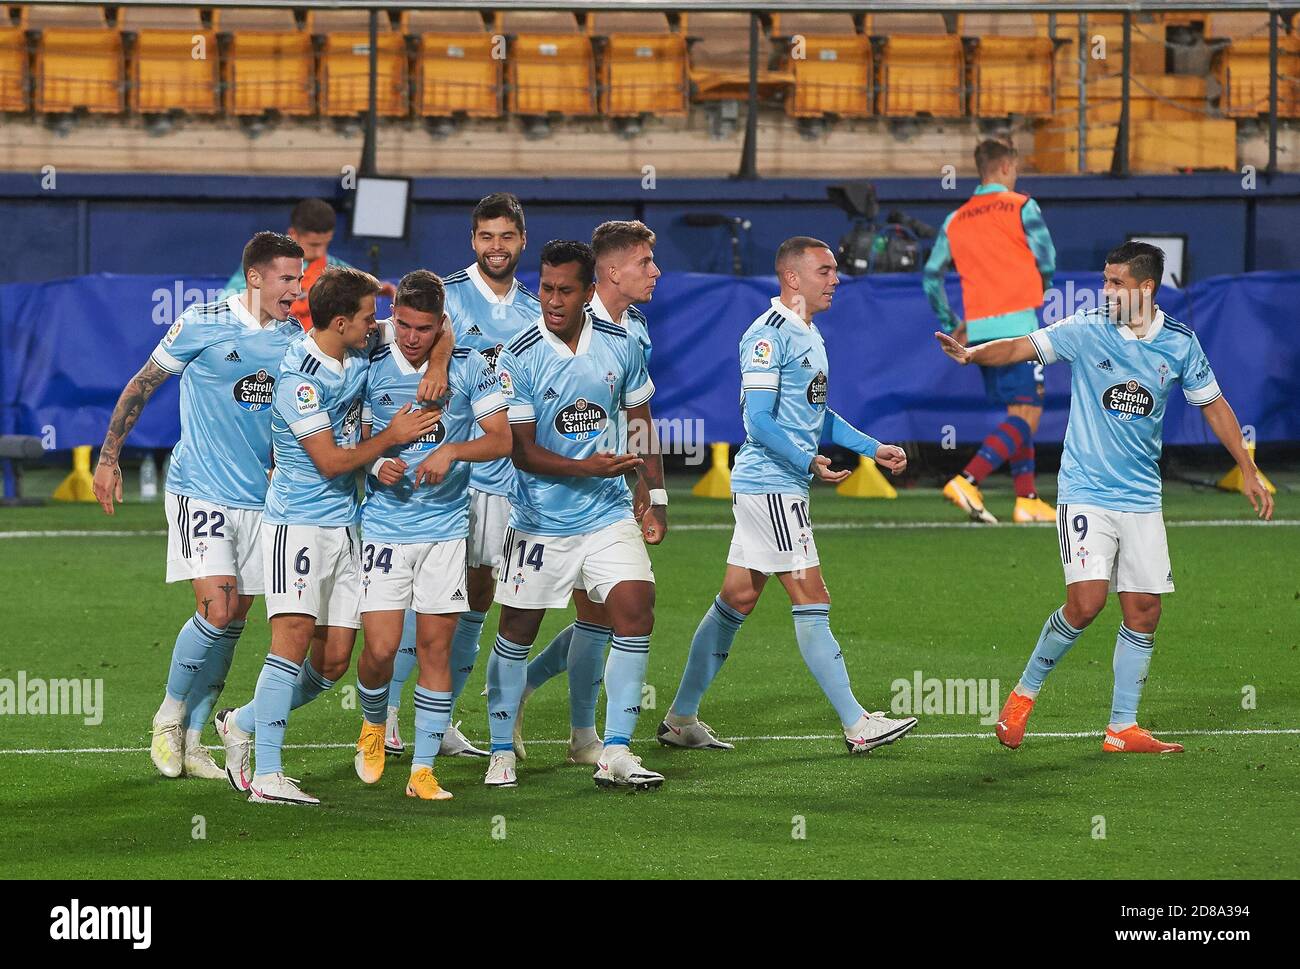 Sergio Carreira of Celta celebrates after his goal with teammates during the Spanish championship La Liga football mach between Levante and Celta Vi C Stock Photo